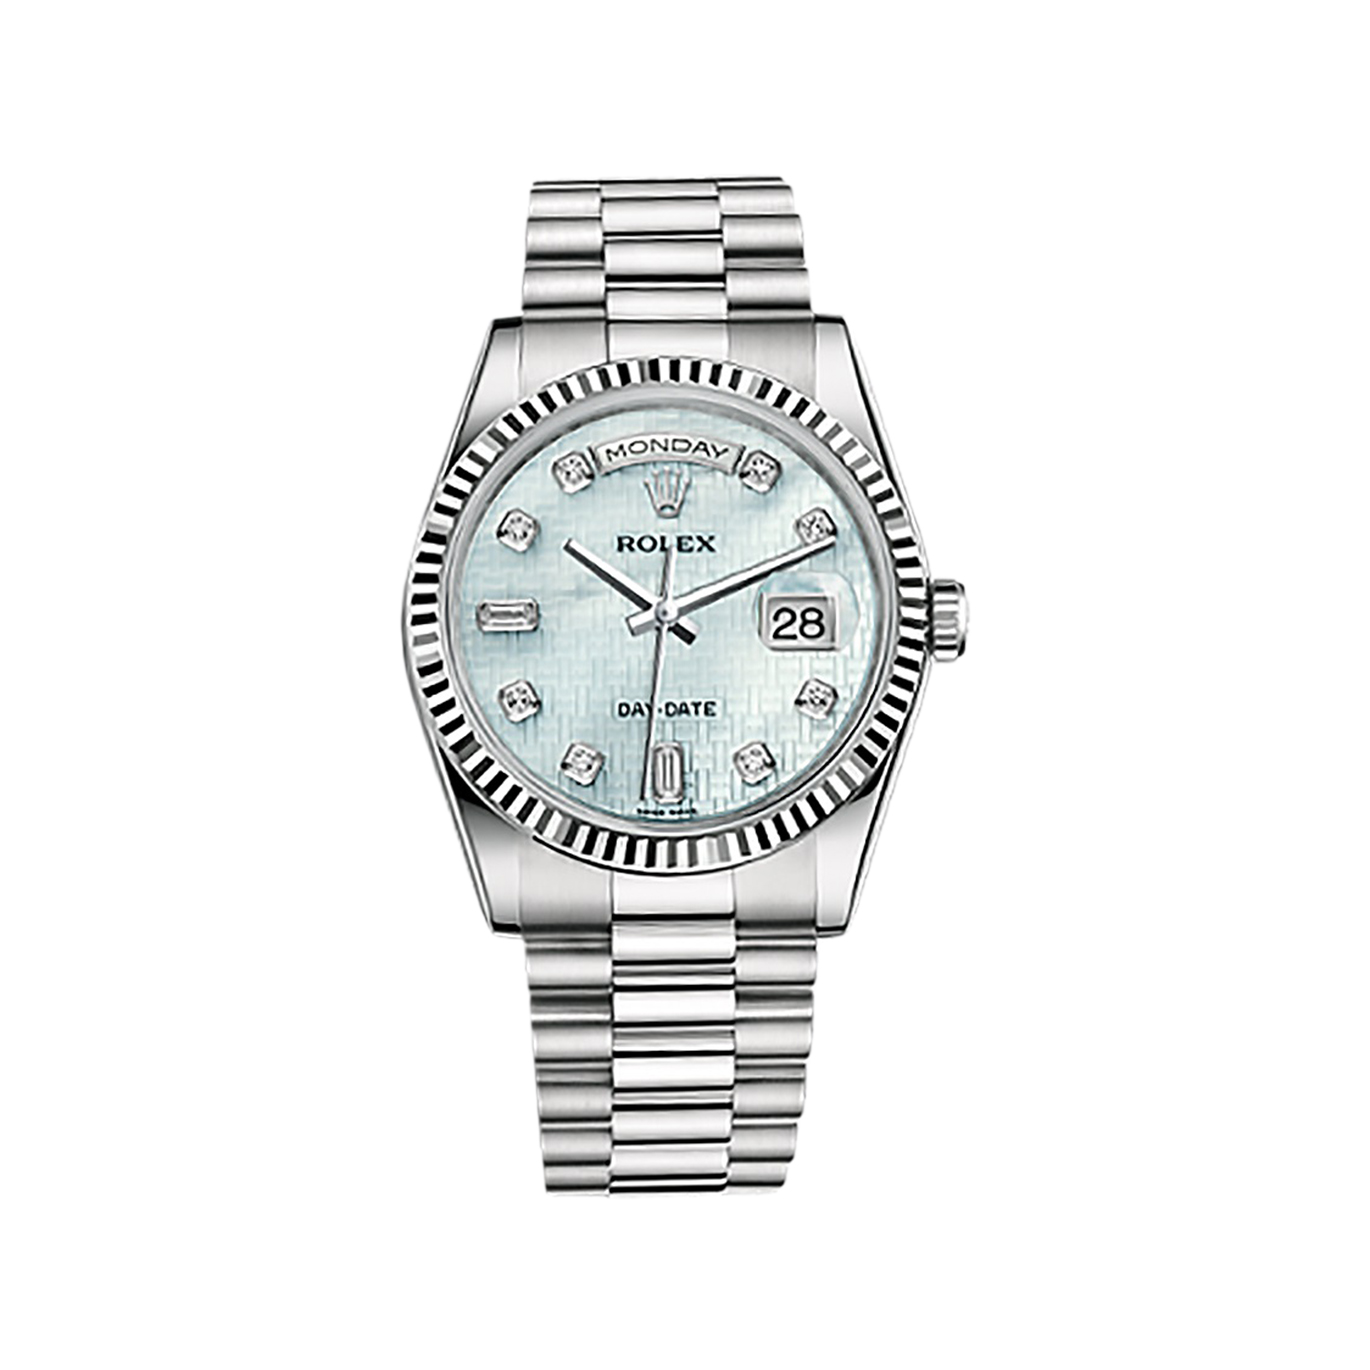 Day-Date 36 118239 White GoldWatch (Platinum Mother-of-Pearl with Oxford Motif Set with Diamonds)